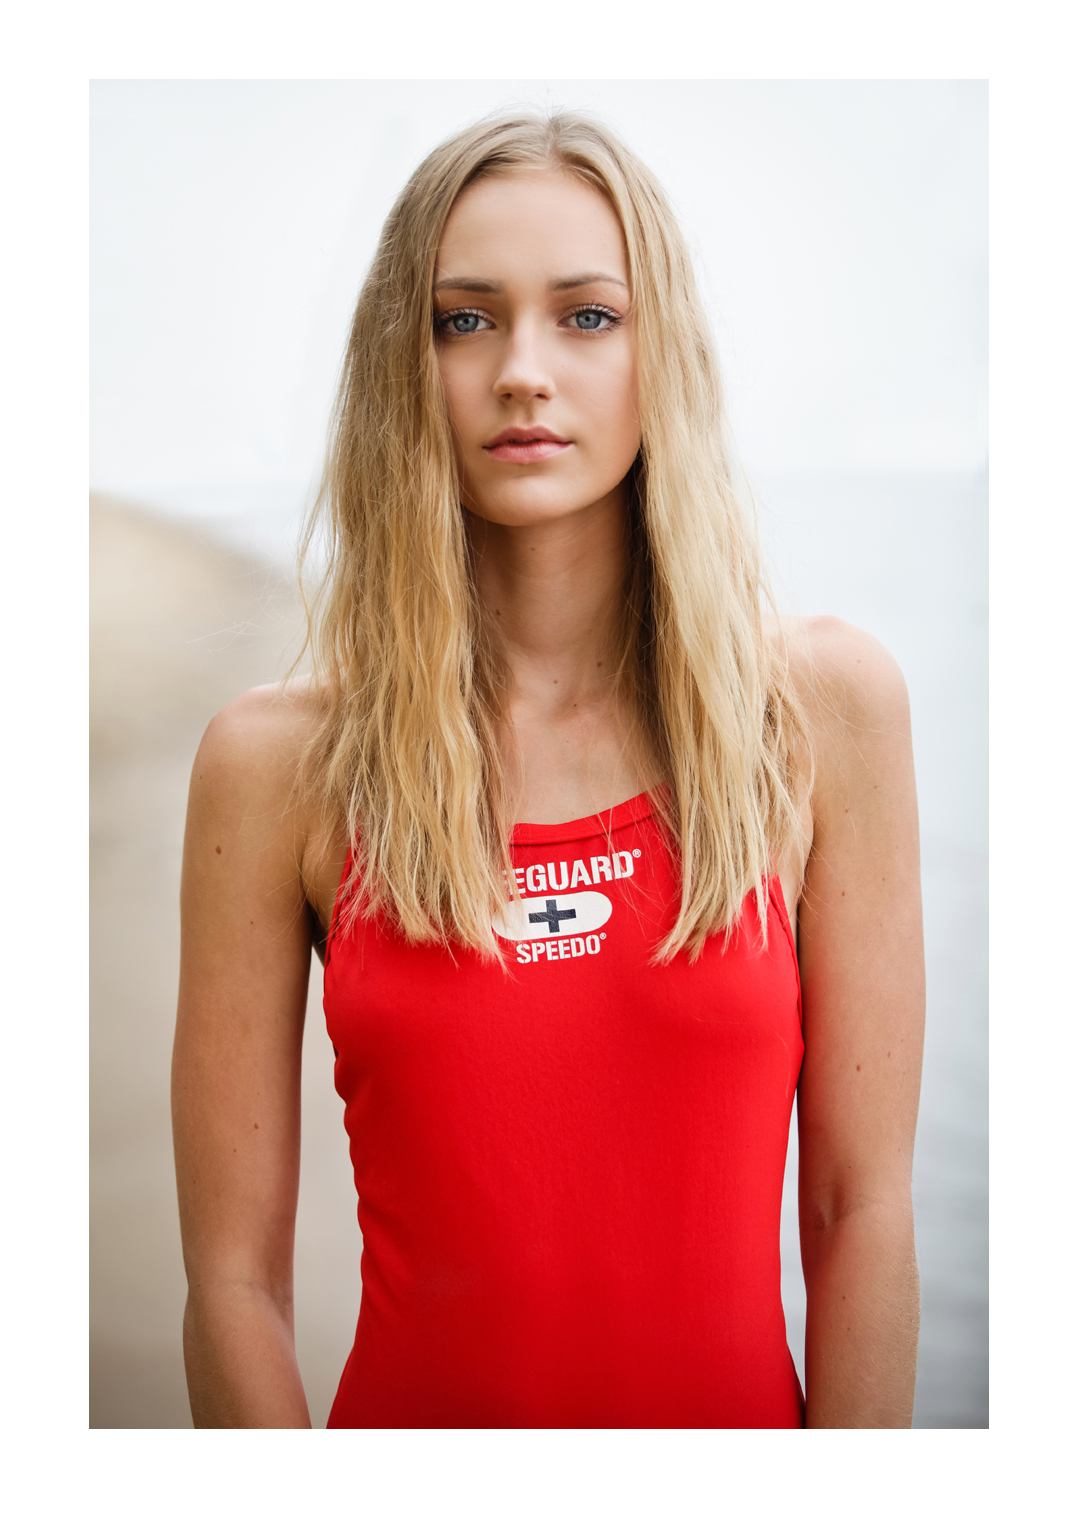 A young blonde woman wearing a red one-piece swim suit with the word Lifeguard printed on it stands facing the camera. Her toweled hair flows over her shoulders